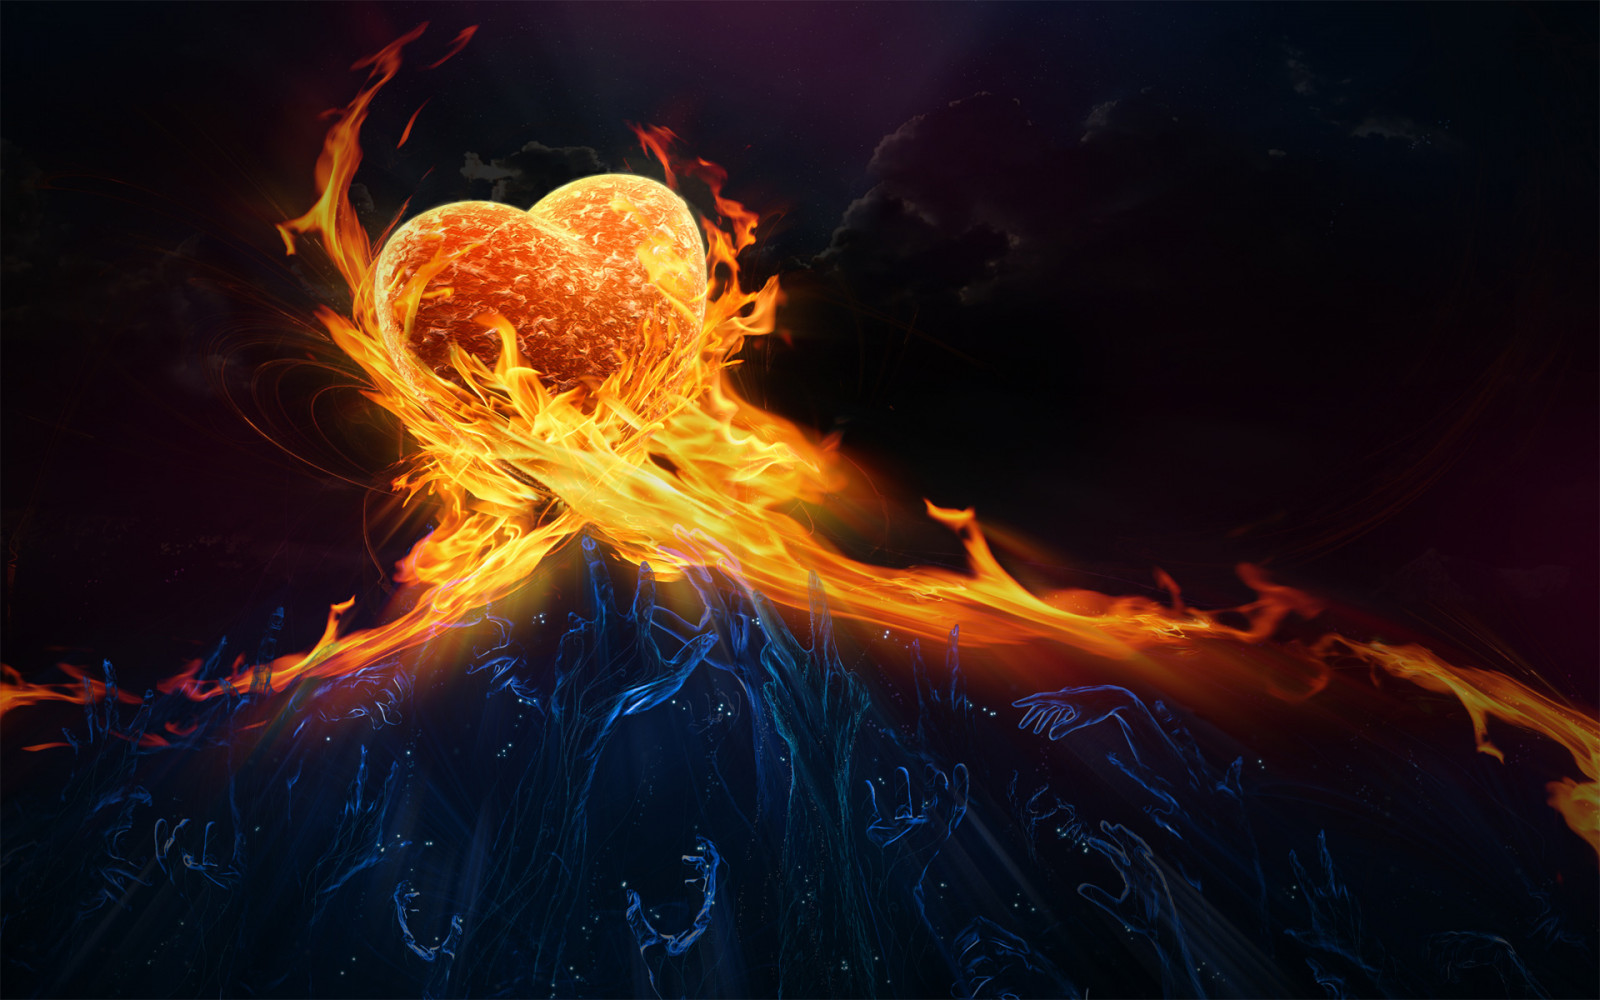 Wallpaper, 1920x1200 px, 3D, artistic, CG, cold, color, digital, emotion, fire, flames, hate, heart, hot, ice, love, mood, psychedelic, romance, Yang, ying 1920x1200